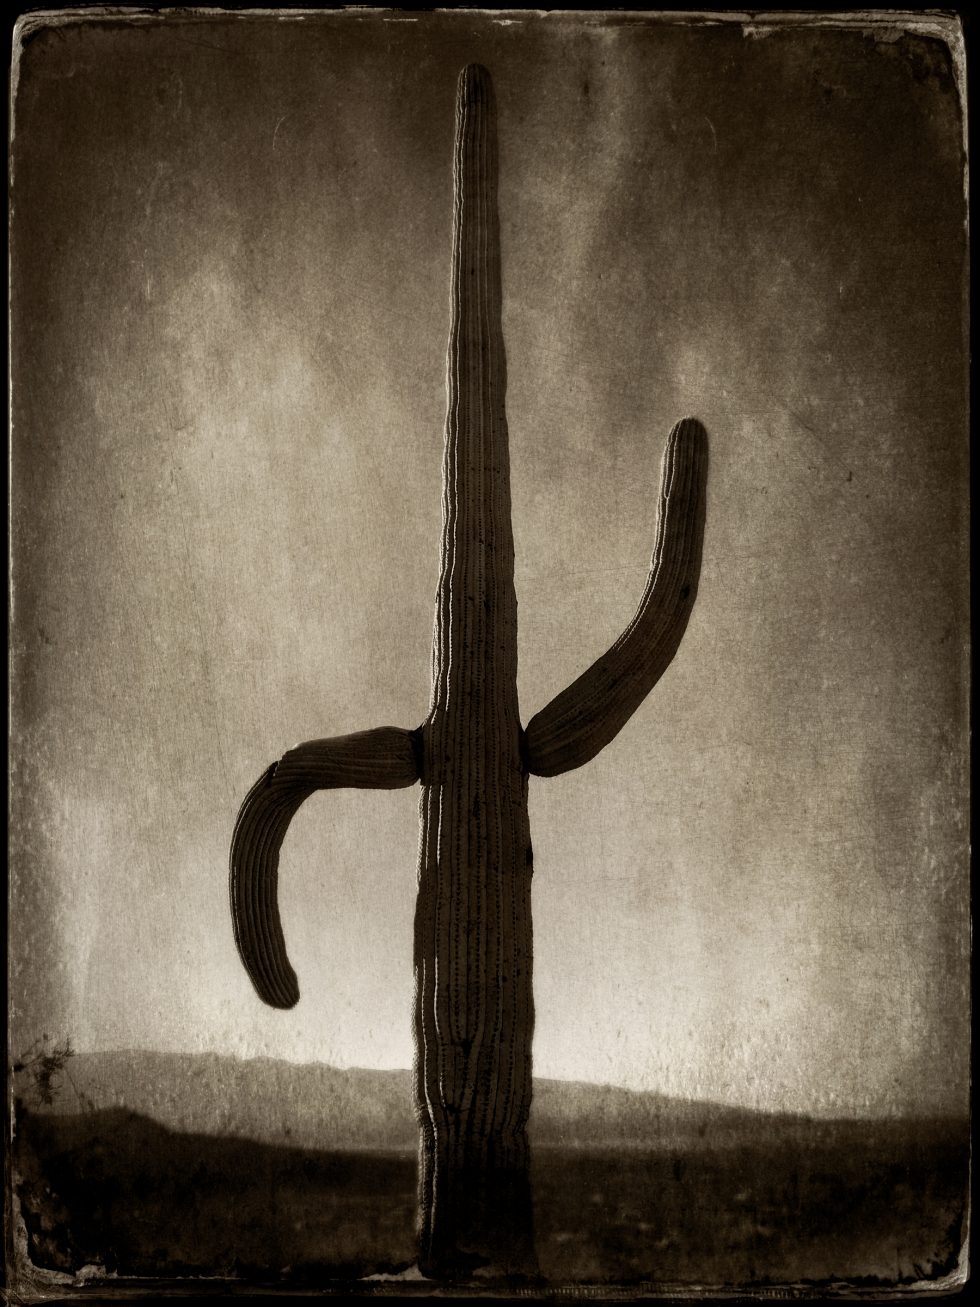 Post processed tintype of iPhone capture